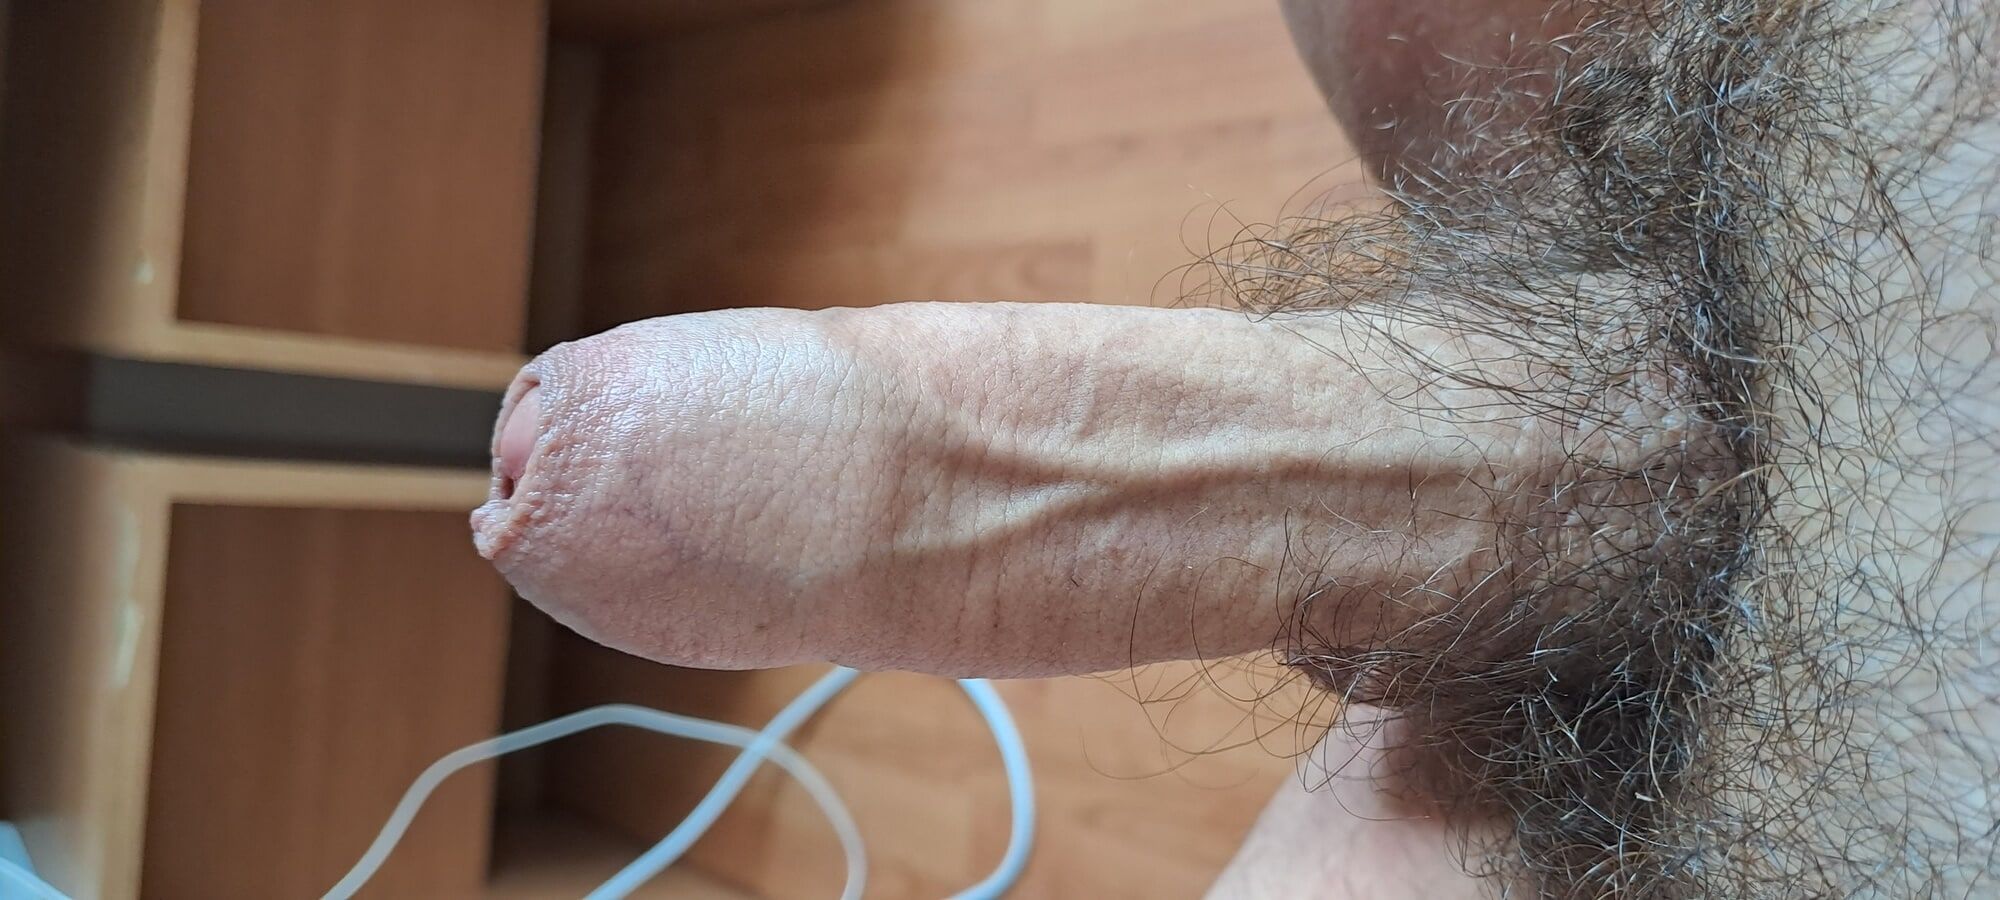 daddy's big hairy cock #3